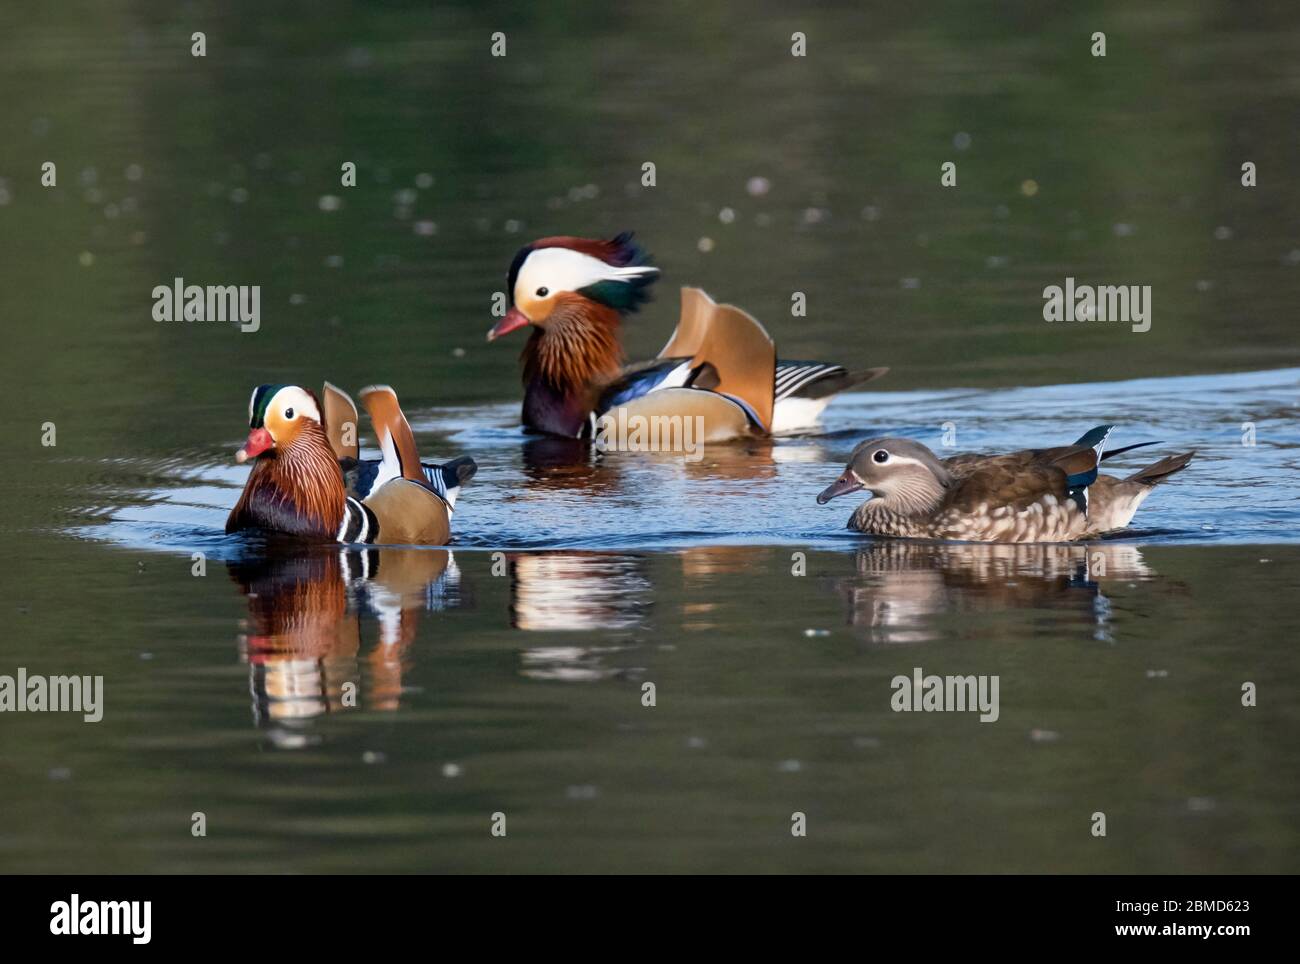 Canines mandarin (Aix galericulata), New Pool, Whitegate, Cheshire, Angleterre, Royaume-Uni Banque D'Images